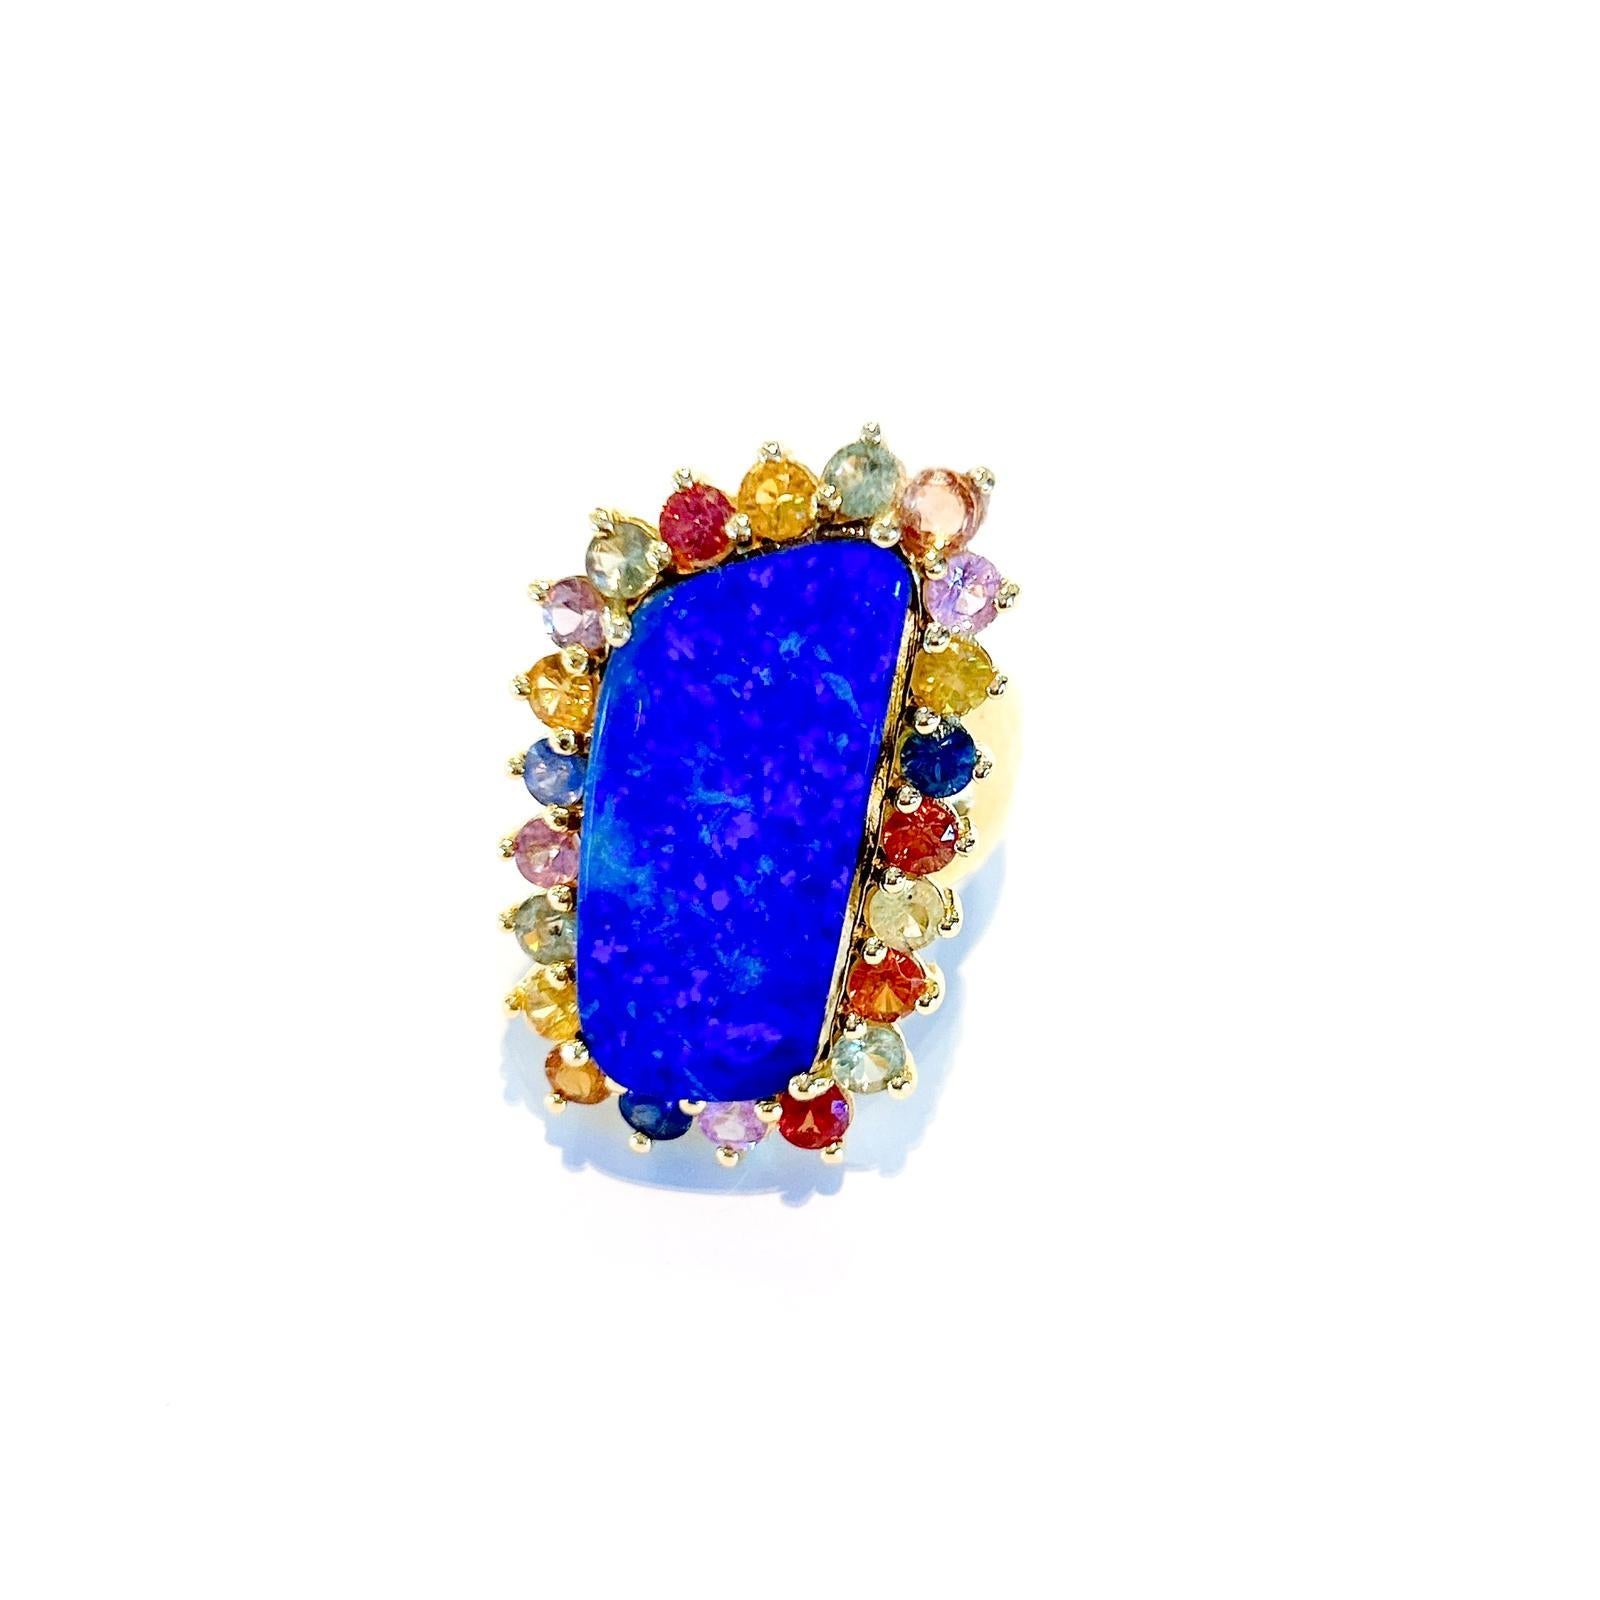 Bochic “Capri” Blue Opal & Multi Color Sapphire Cocktail Ring Set in 22k Gold In New Condition For Sale In New York, NY